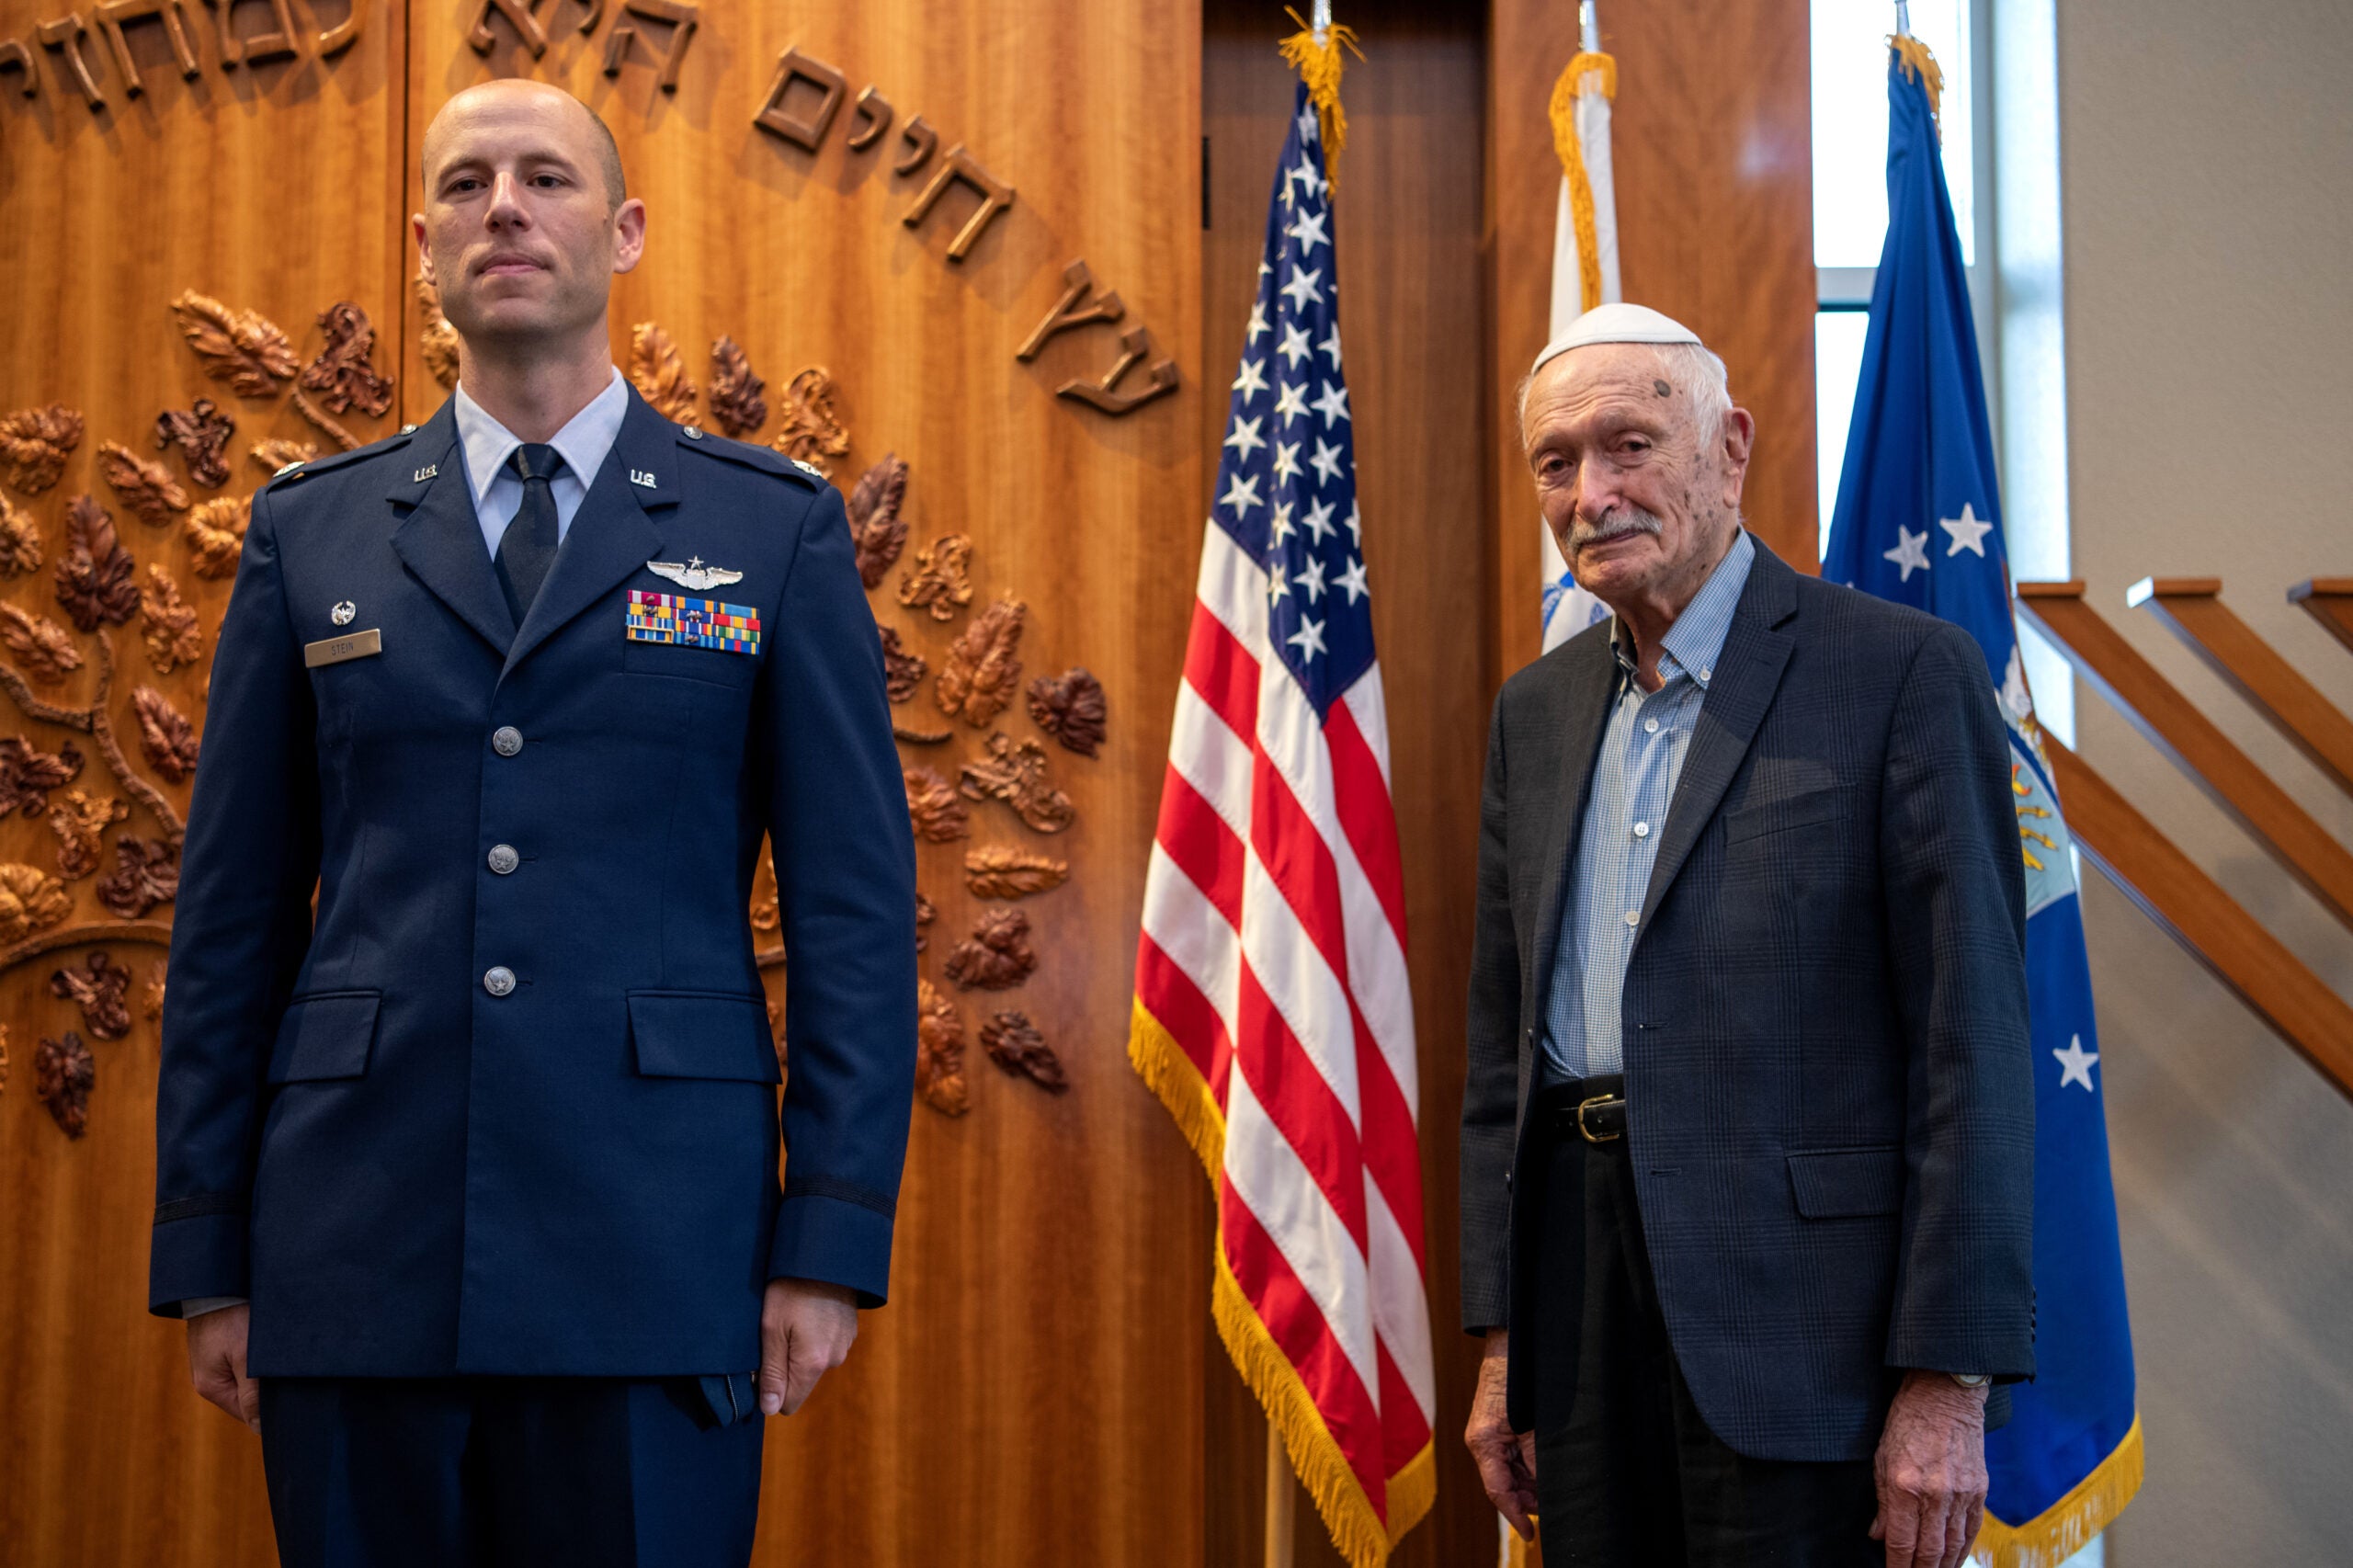 U.S. Air Force Lt. Col. Stein (left), 502nd Operations Support Squadron commander, prepares to present U.S. Army Air Corps 1st Lt. Gerald Teldon, retired, with the Air Medal for his honorable service as a pilot on July 29, 2022, at the Chabad Center for Jewish Life and Learning, San Antonio, Texas. Teldon, born in Bronx, N.Y., in 1924, joined the military in 1944. He completed 62 missions during WWII and the Korean War. Lt. Col. Andrew Stein, 502nd Operations Support Squadron commander, was the presiding officers. The awards presented to Teldon are as follows: the Air Medal; American Campaign Medal; European – African – Middle Eastern Campaign Medal; World War II Victory Medal; National Defense Medal; and the Distinguished Unit Citation. (U.S. Air Force photo by Sarayuth Pinthong)